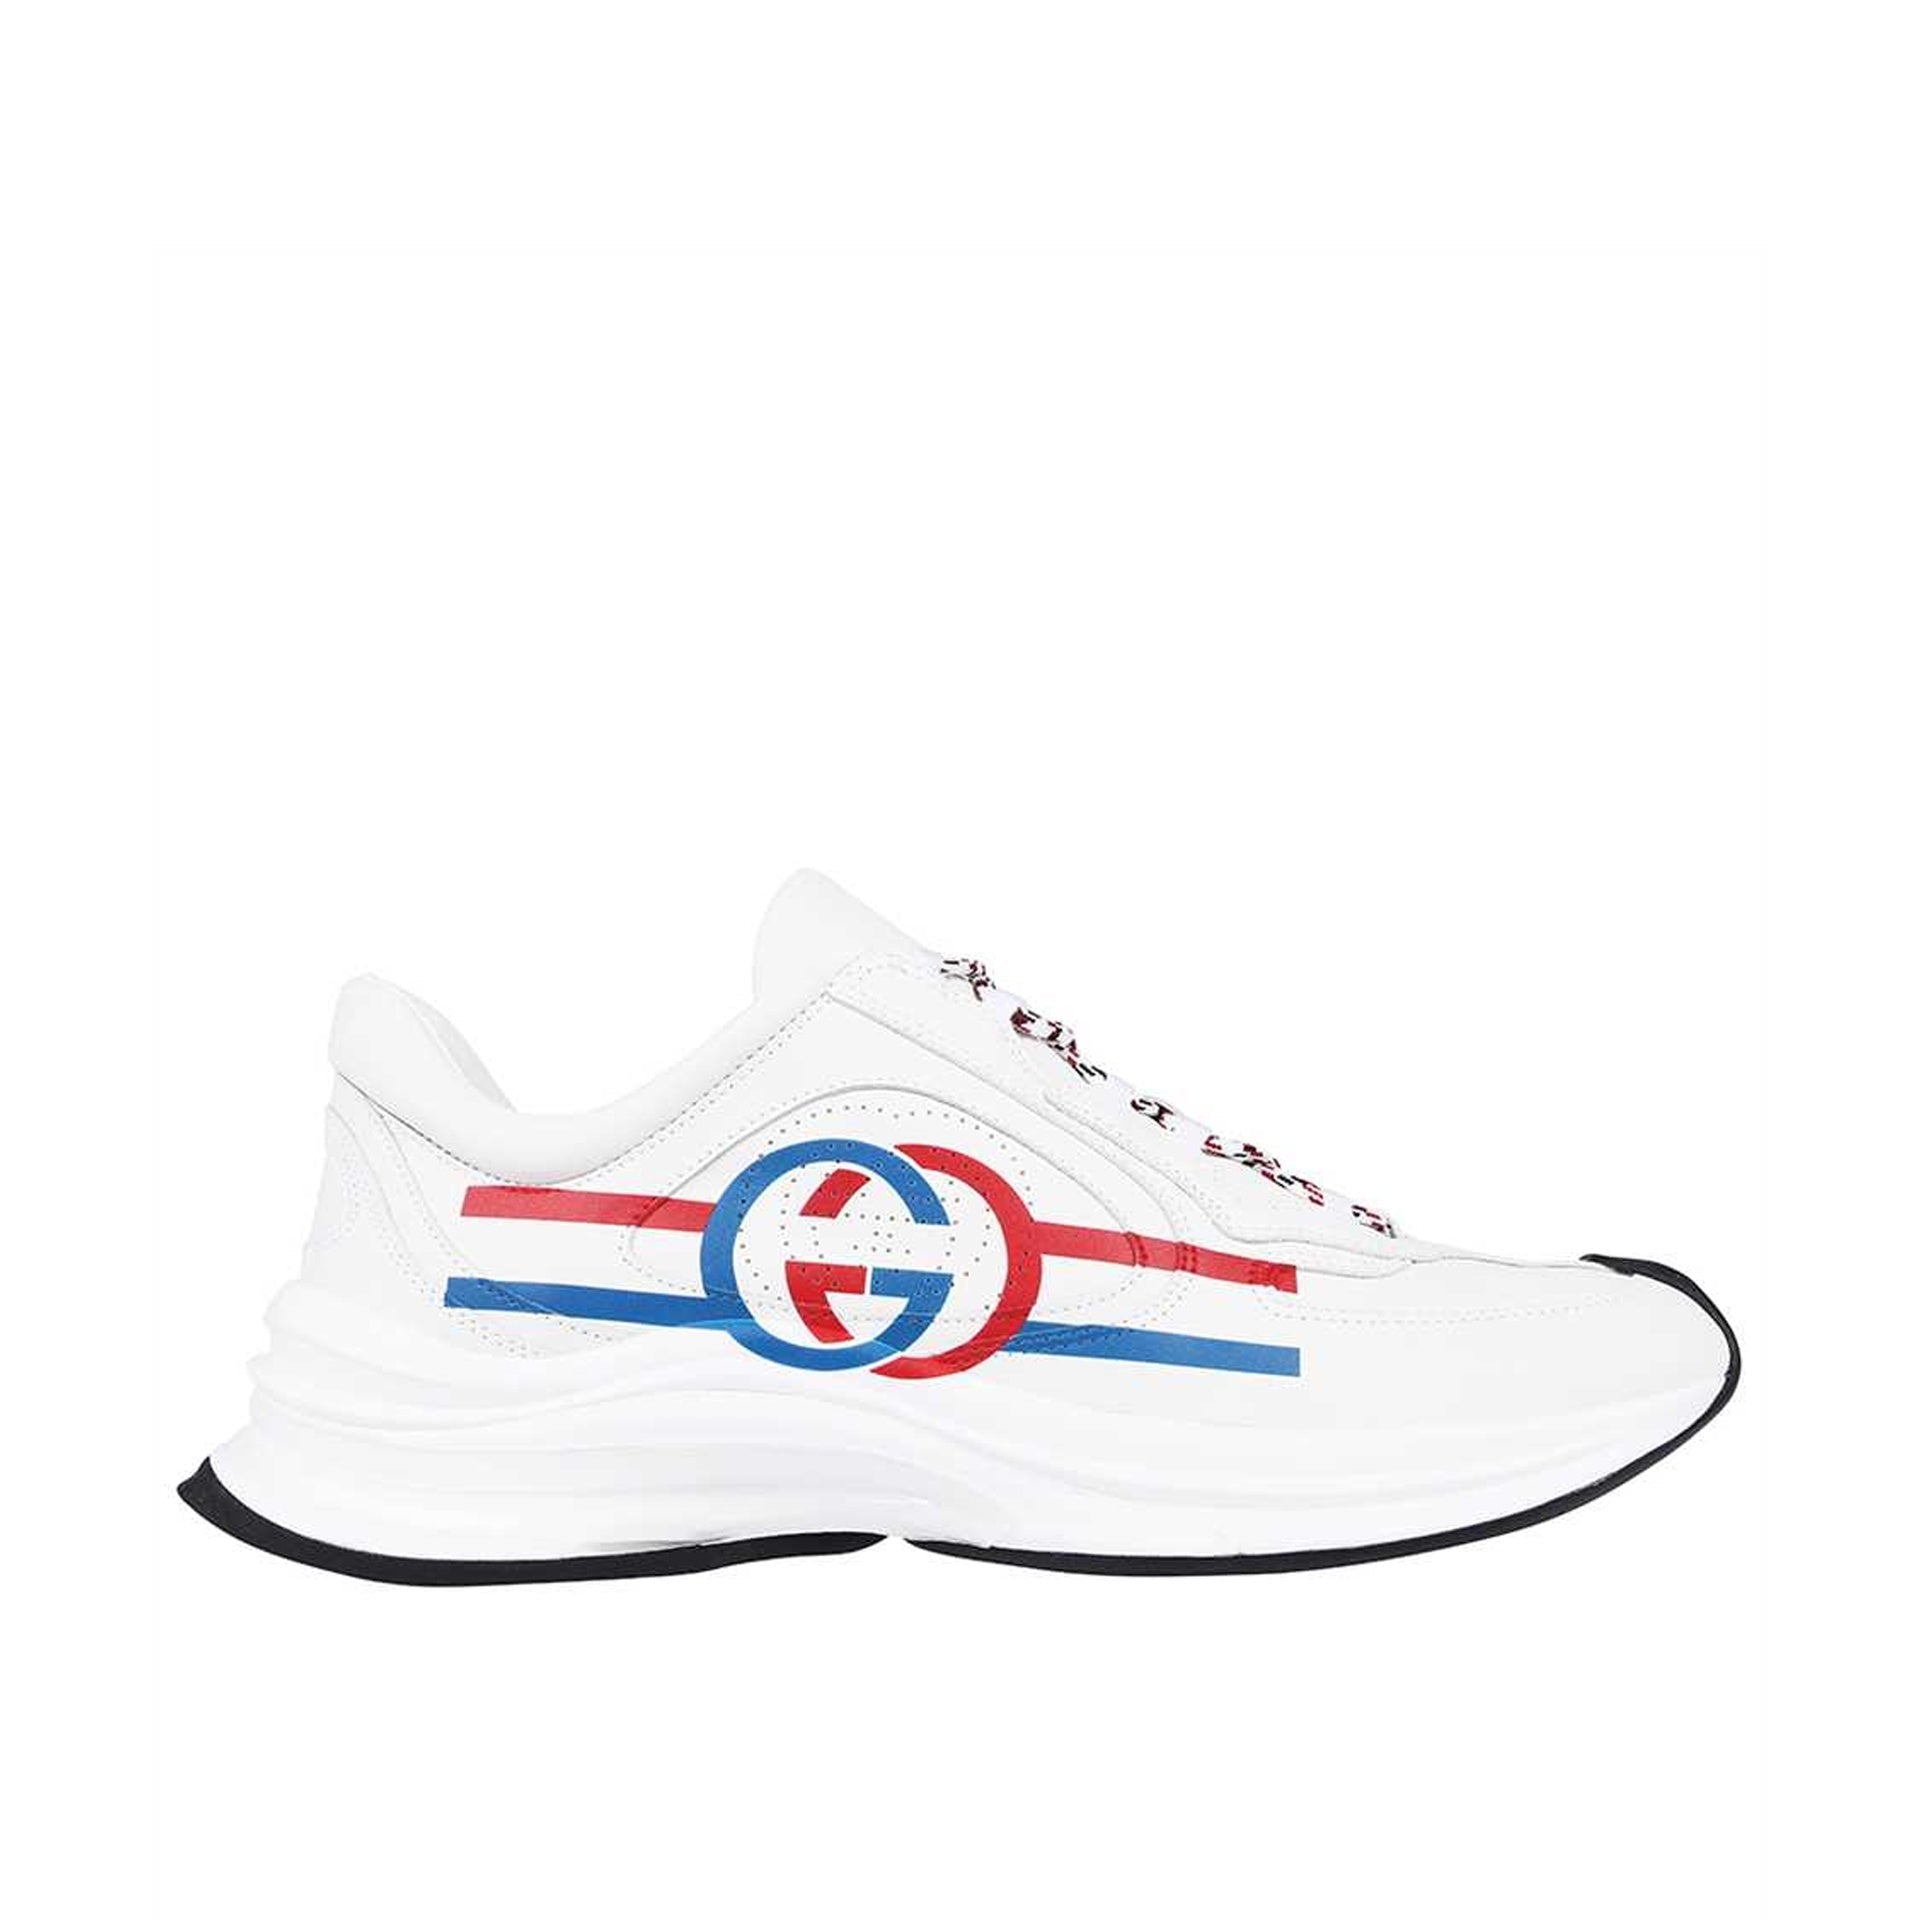 GUCCI-OUTLET-SALE-Gucci-Run-Leather-Sneakers-Sneakers-WHITE-42-ARCHIVE-COLLECTION.jpg